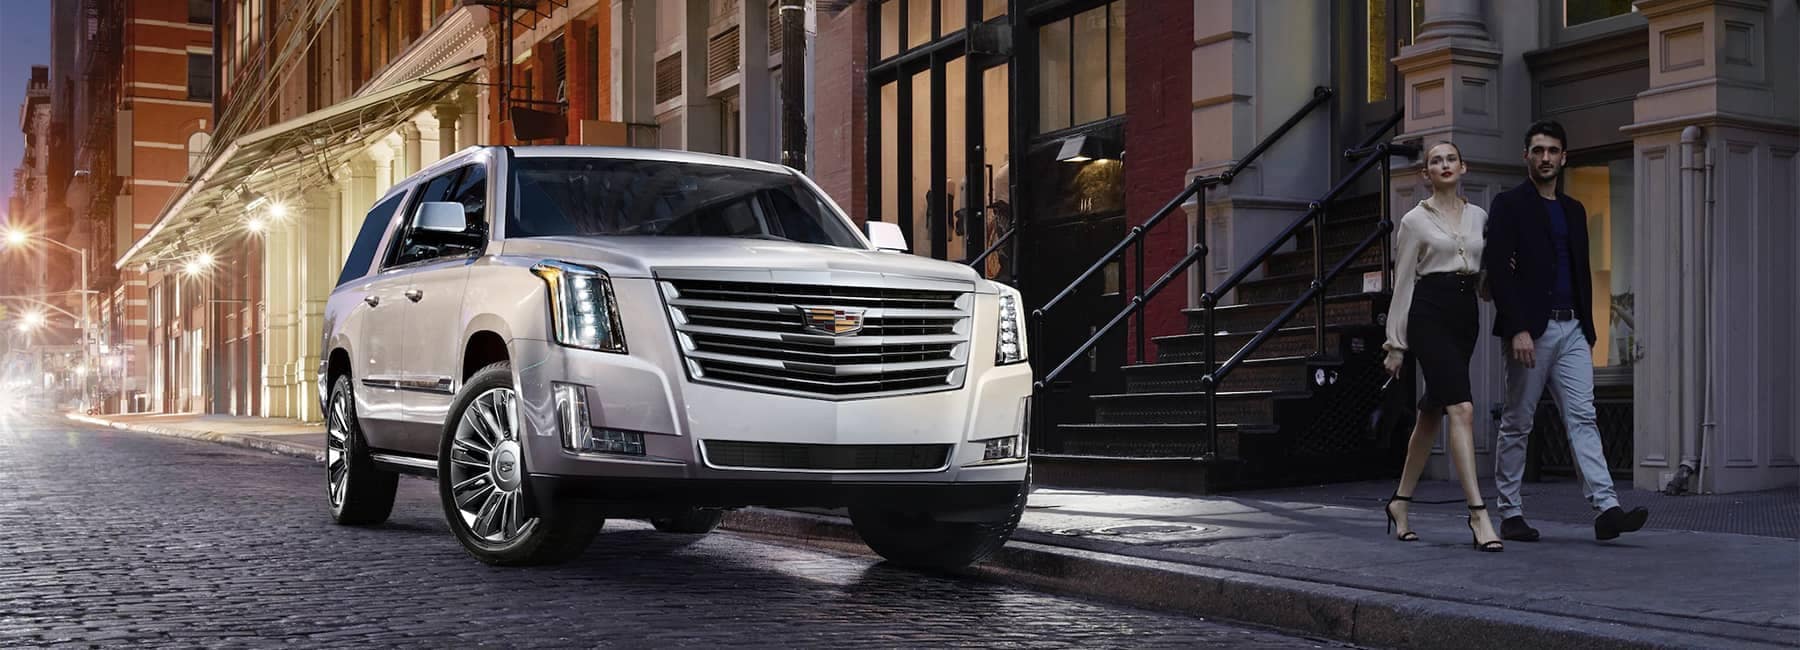 2020-Cadillac-Escalade-Full-Size-SUV-Front-Exterior-Parked